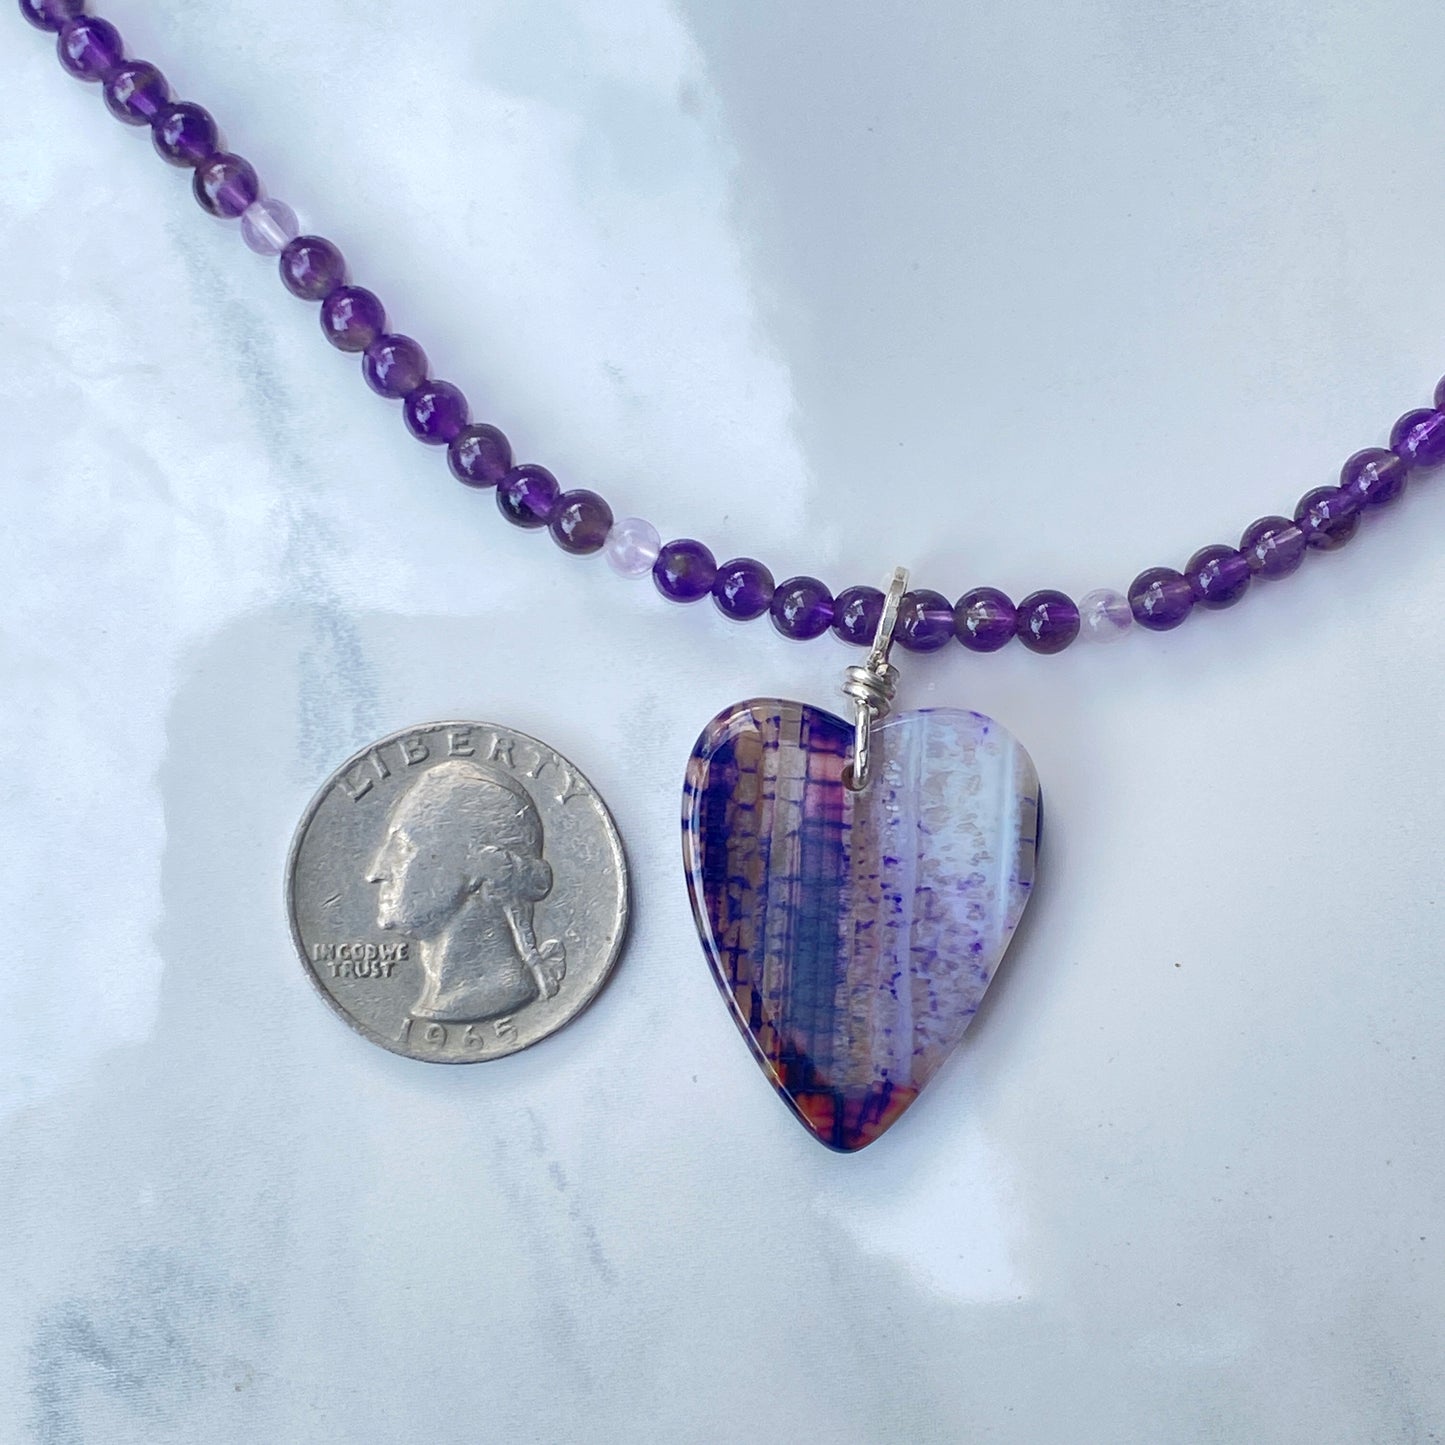 Dragon’s Vein Agate Heart Pendant Choker/Necklace with Dark and Lavender Amethyst Gemstone Necklace